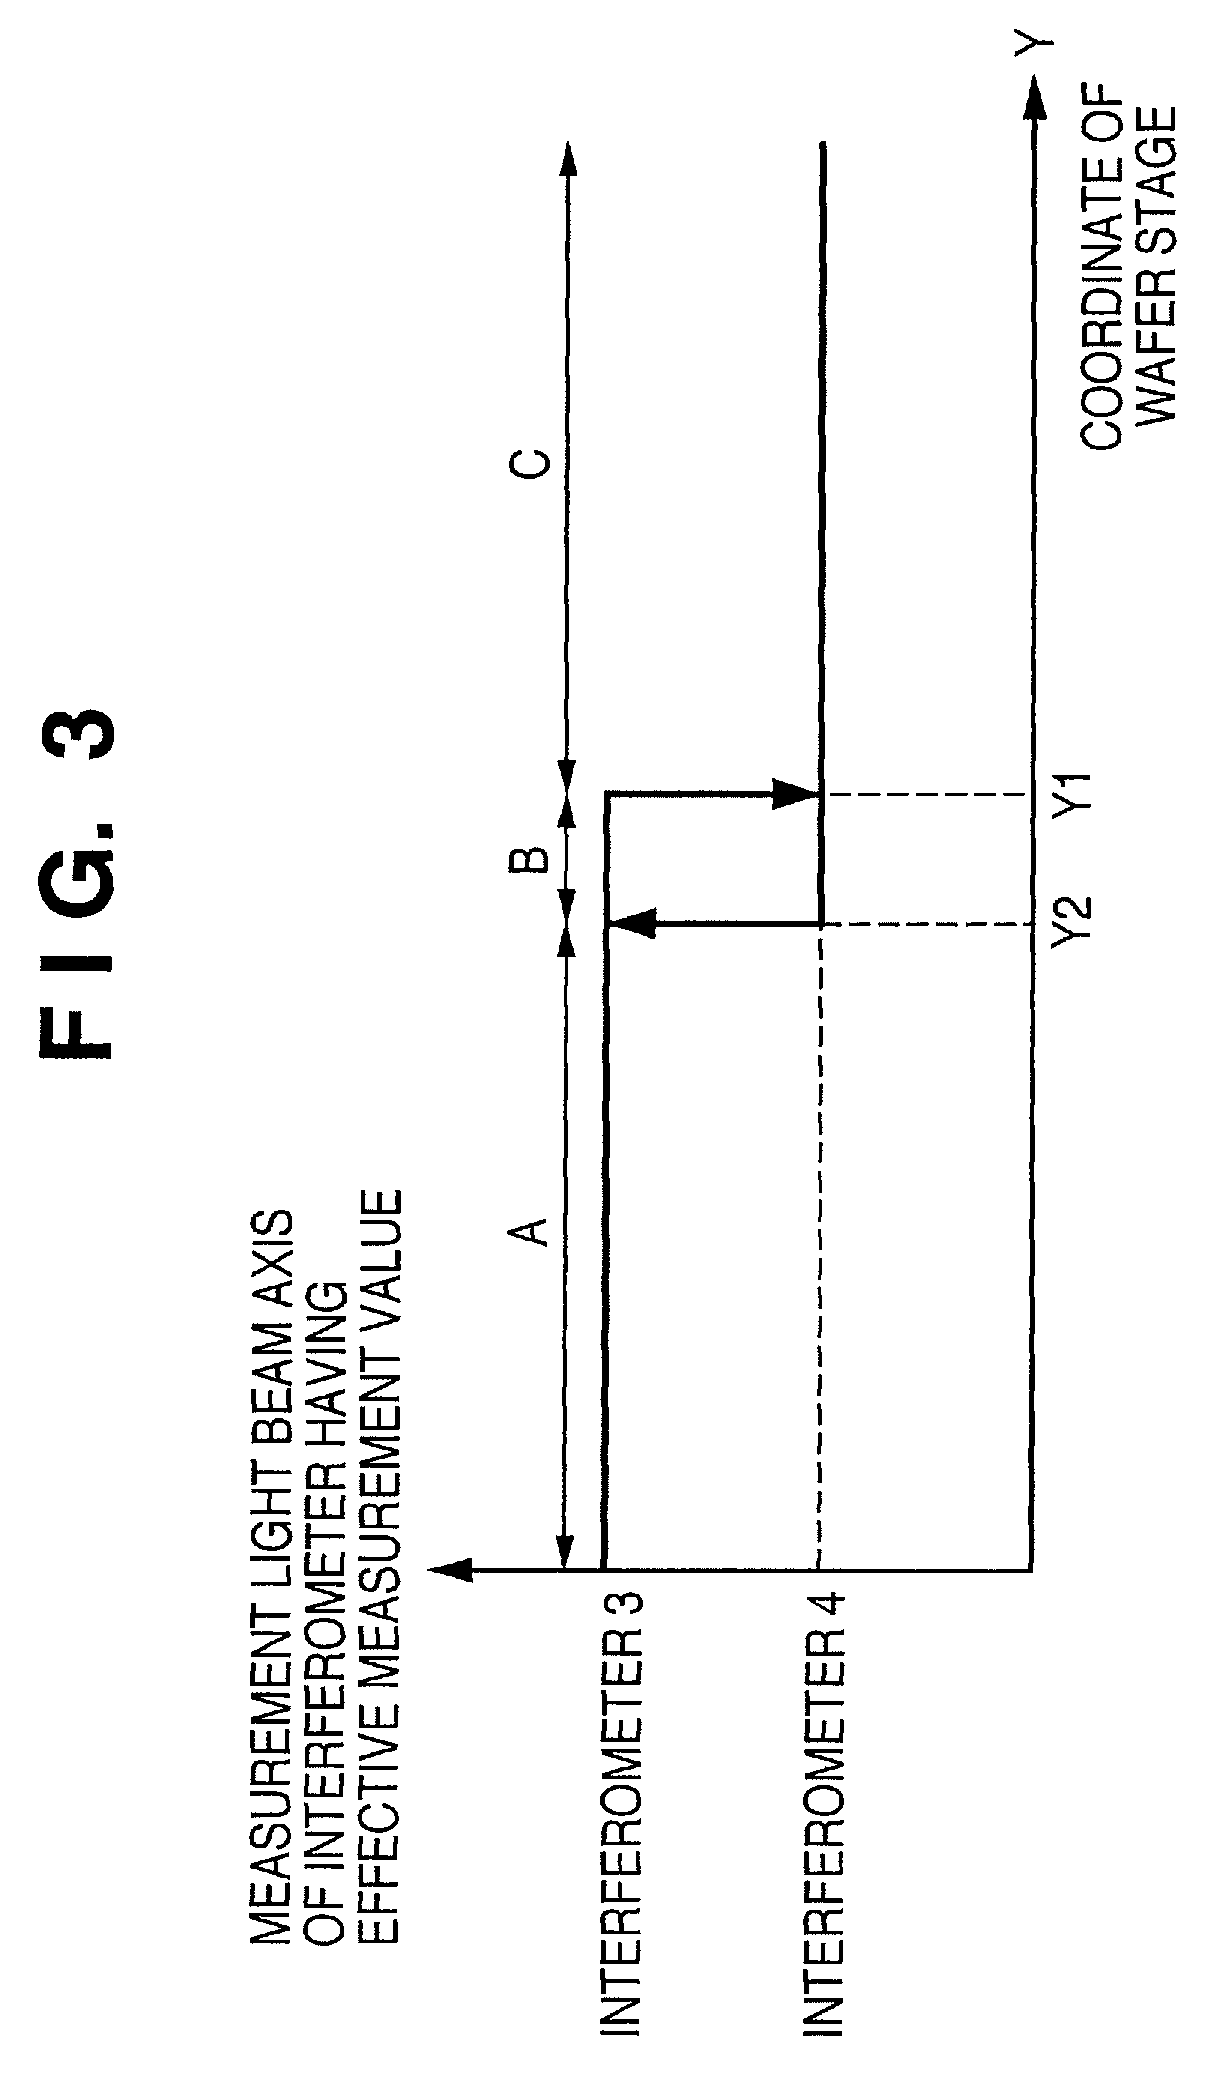 Positioning apparatus, exposure apparatus and device manufacturing method in which a correction unit corrects a value measured by a selected measuring device